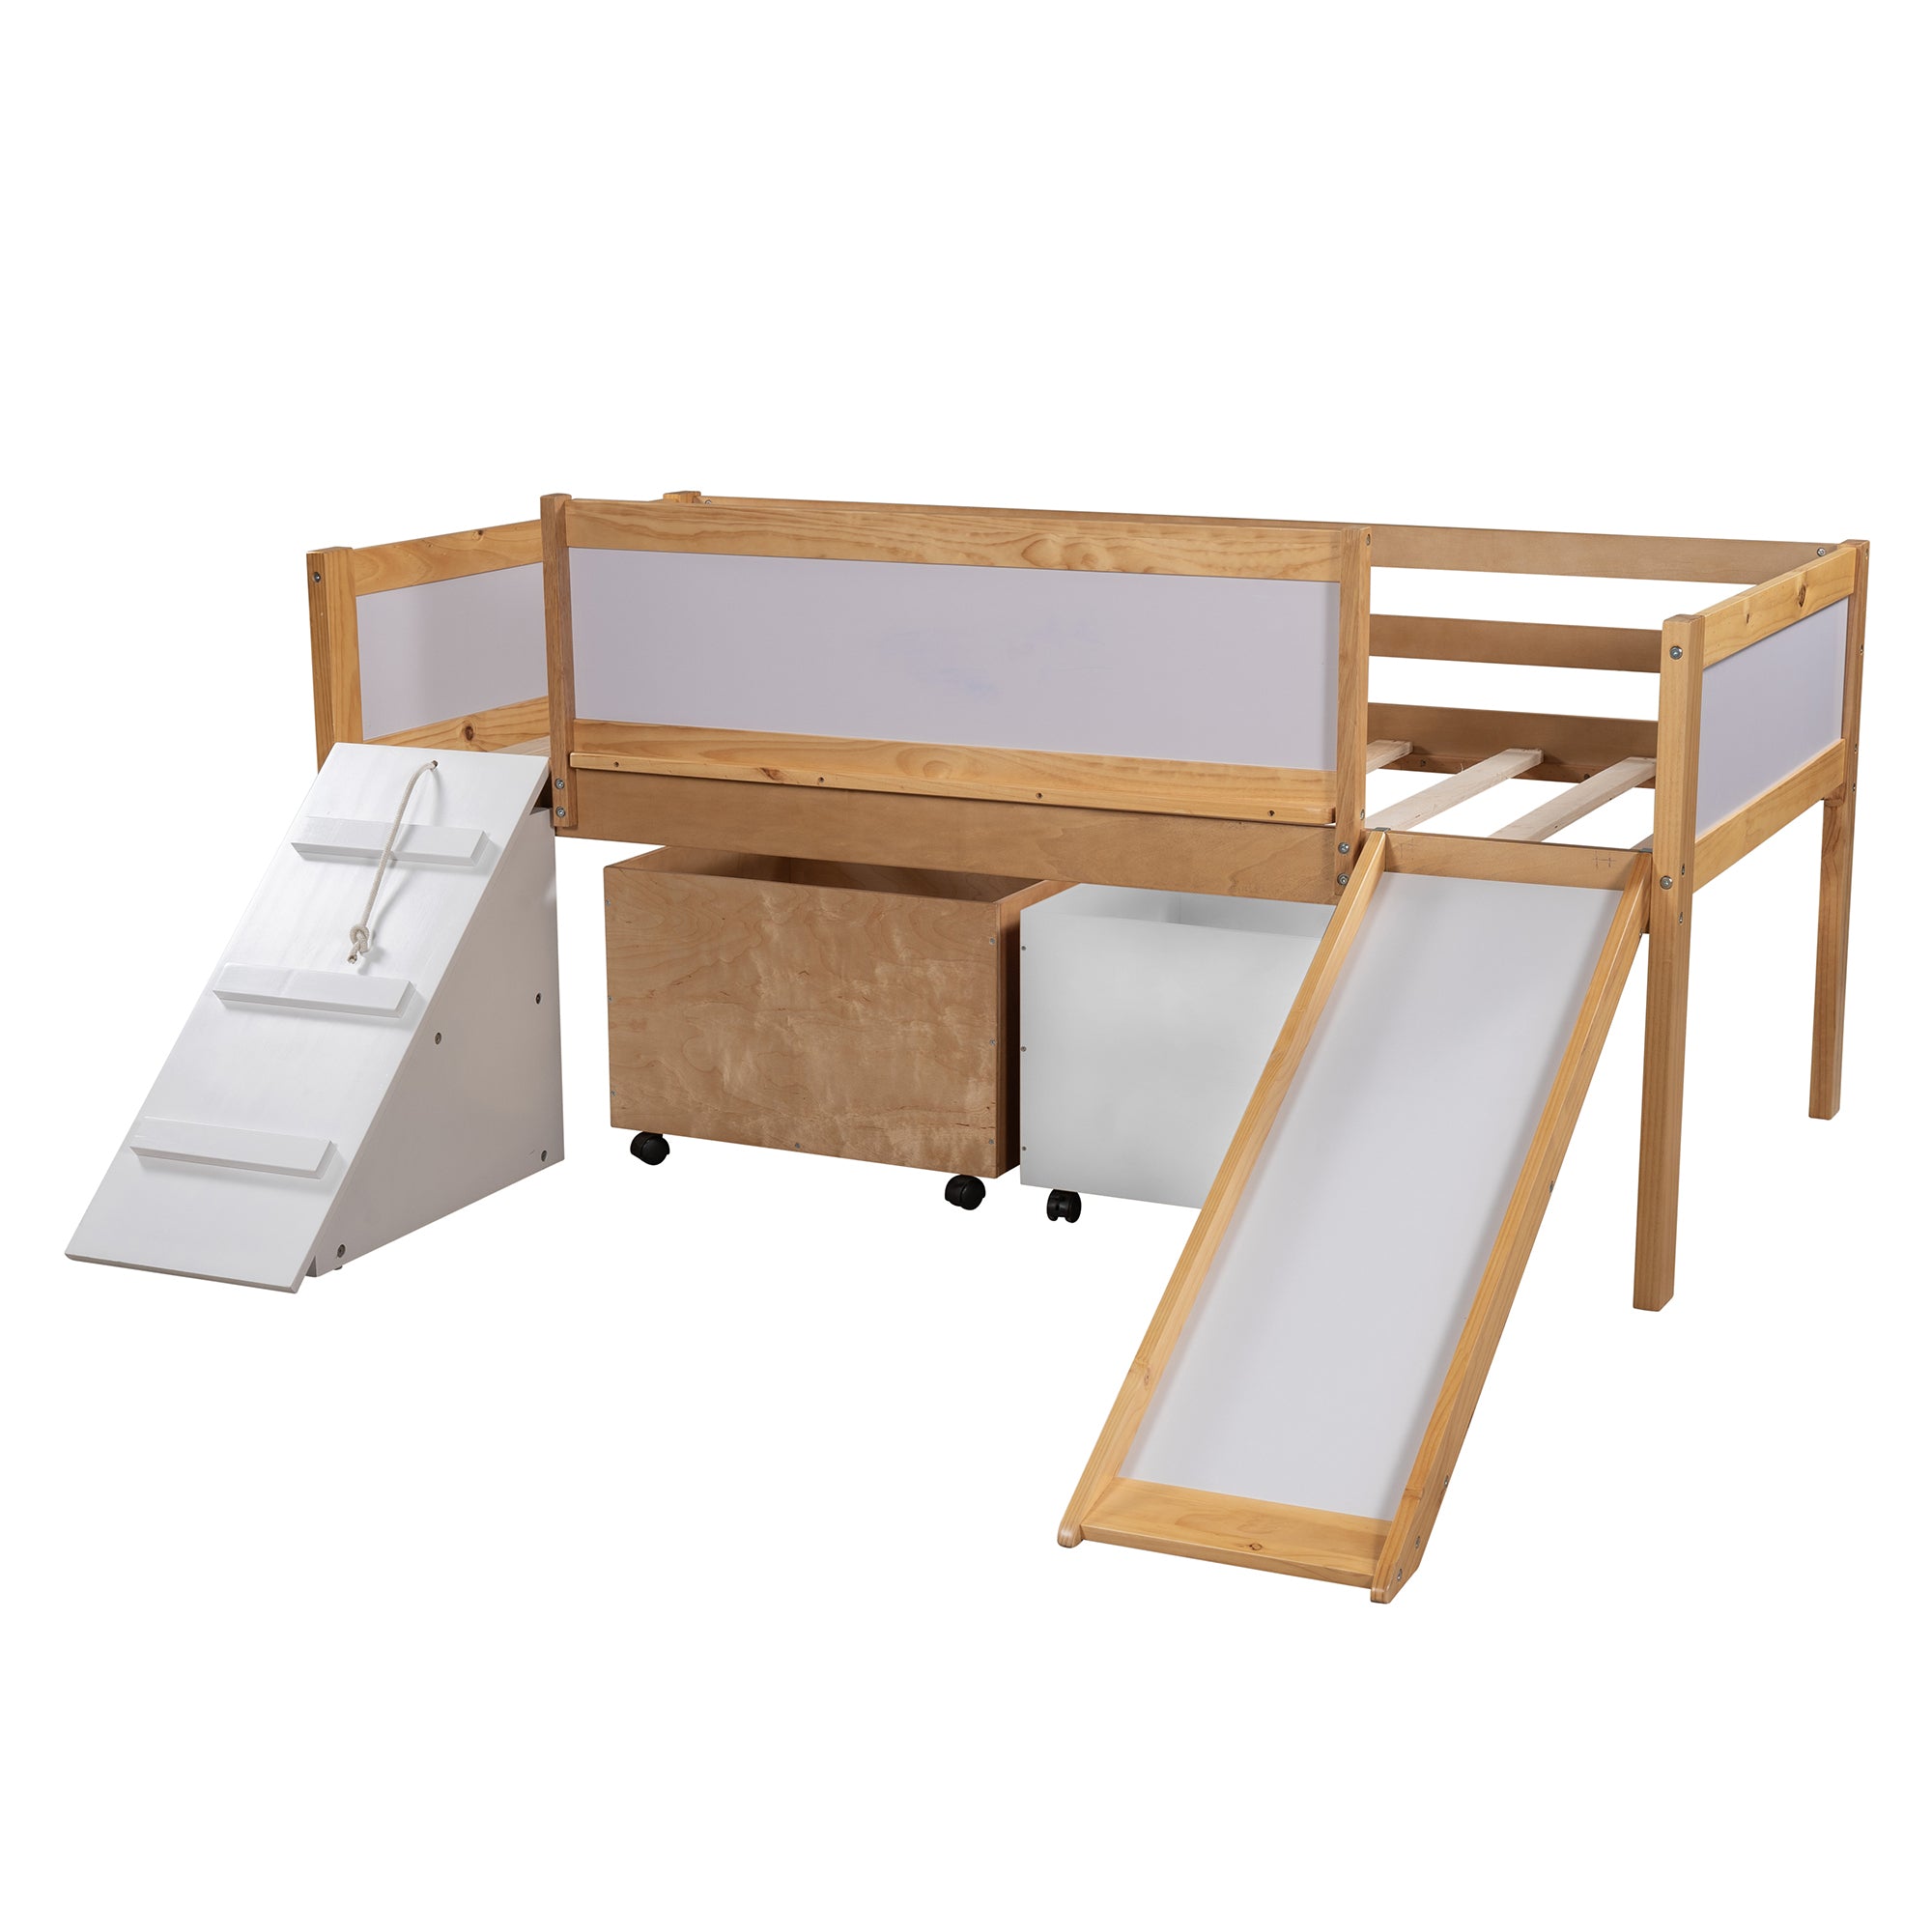 Twin size Low Loft Bed Wooden Bed with Two Storage Boxes (Natural)